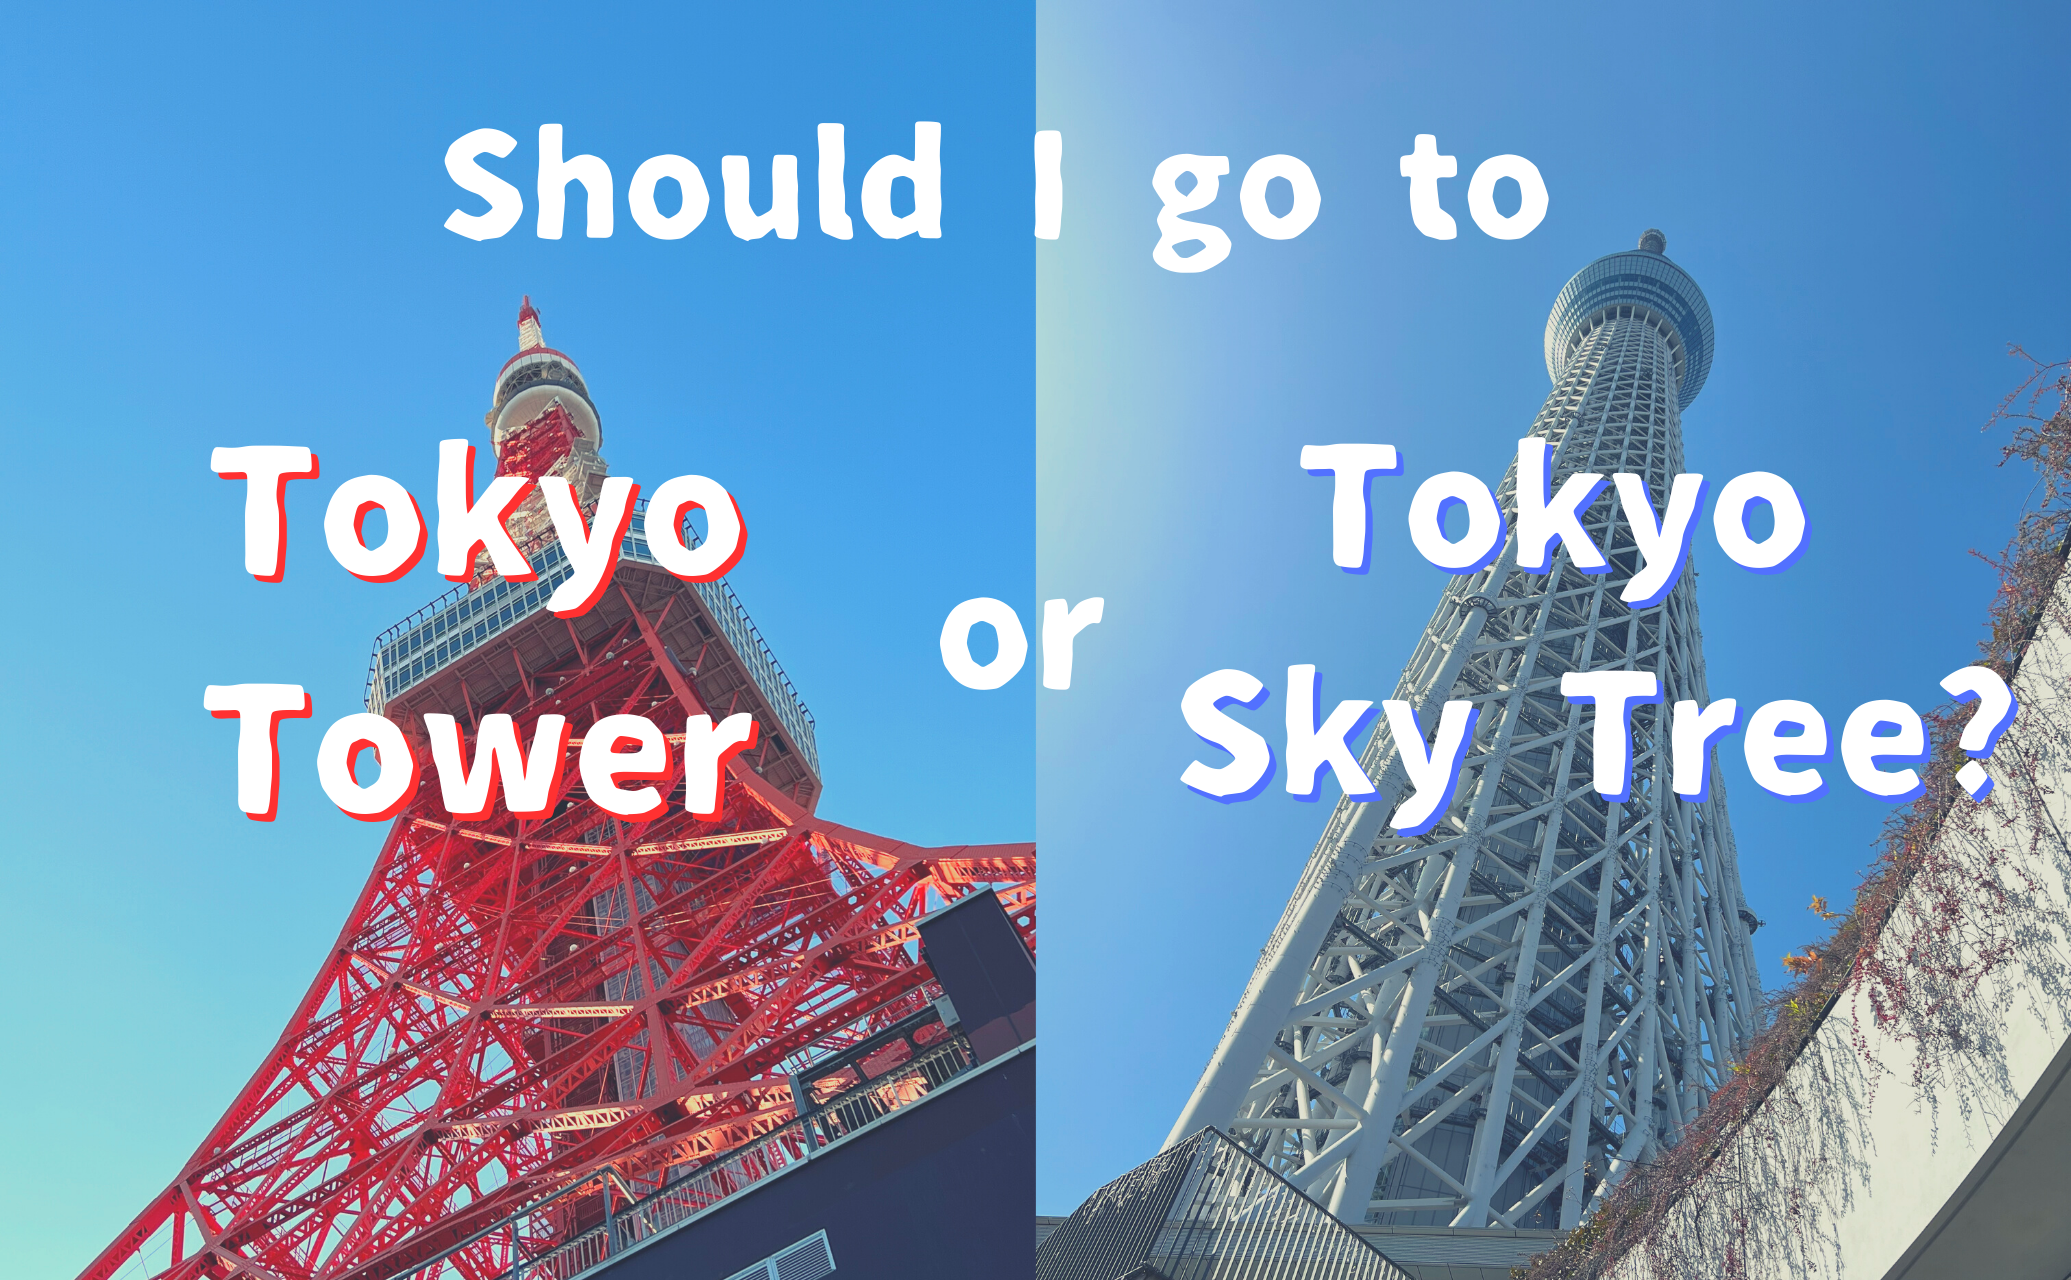 Should I go to Tokyo Tower or Tokyo Skytree?